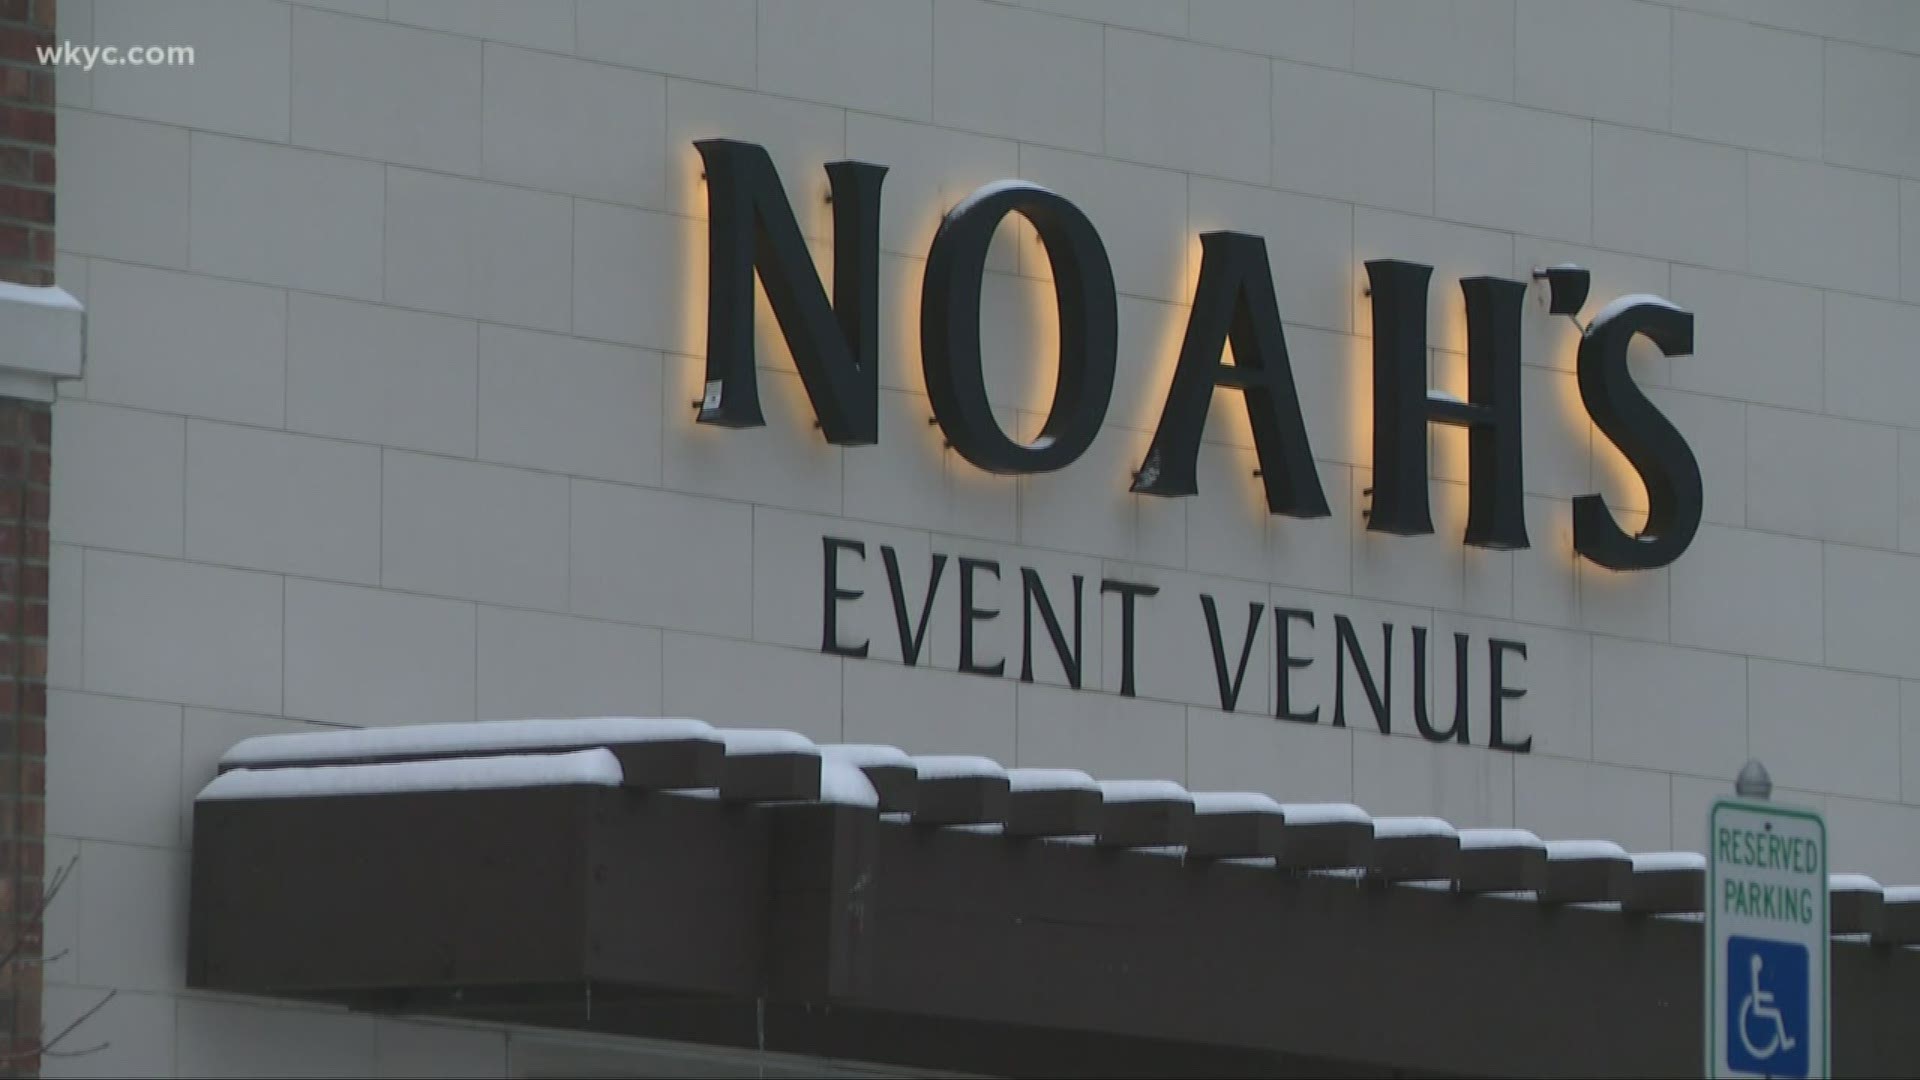 Noah's Event Venue is known for hosting beautiful weddings across the nation. The venue is closed for good, leaving dozens of couples to figure out what's next.